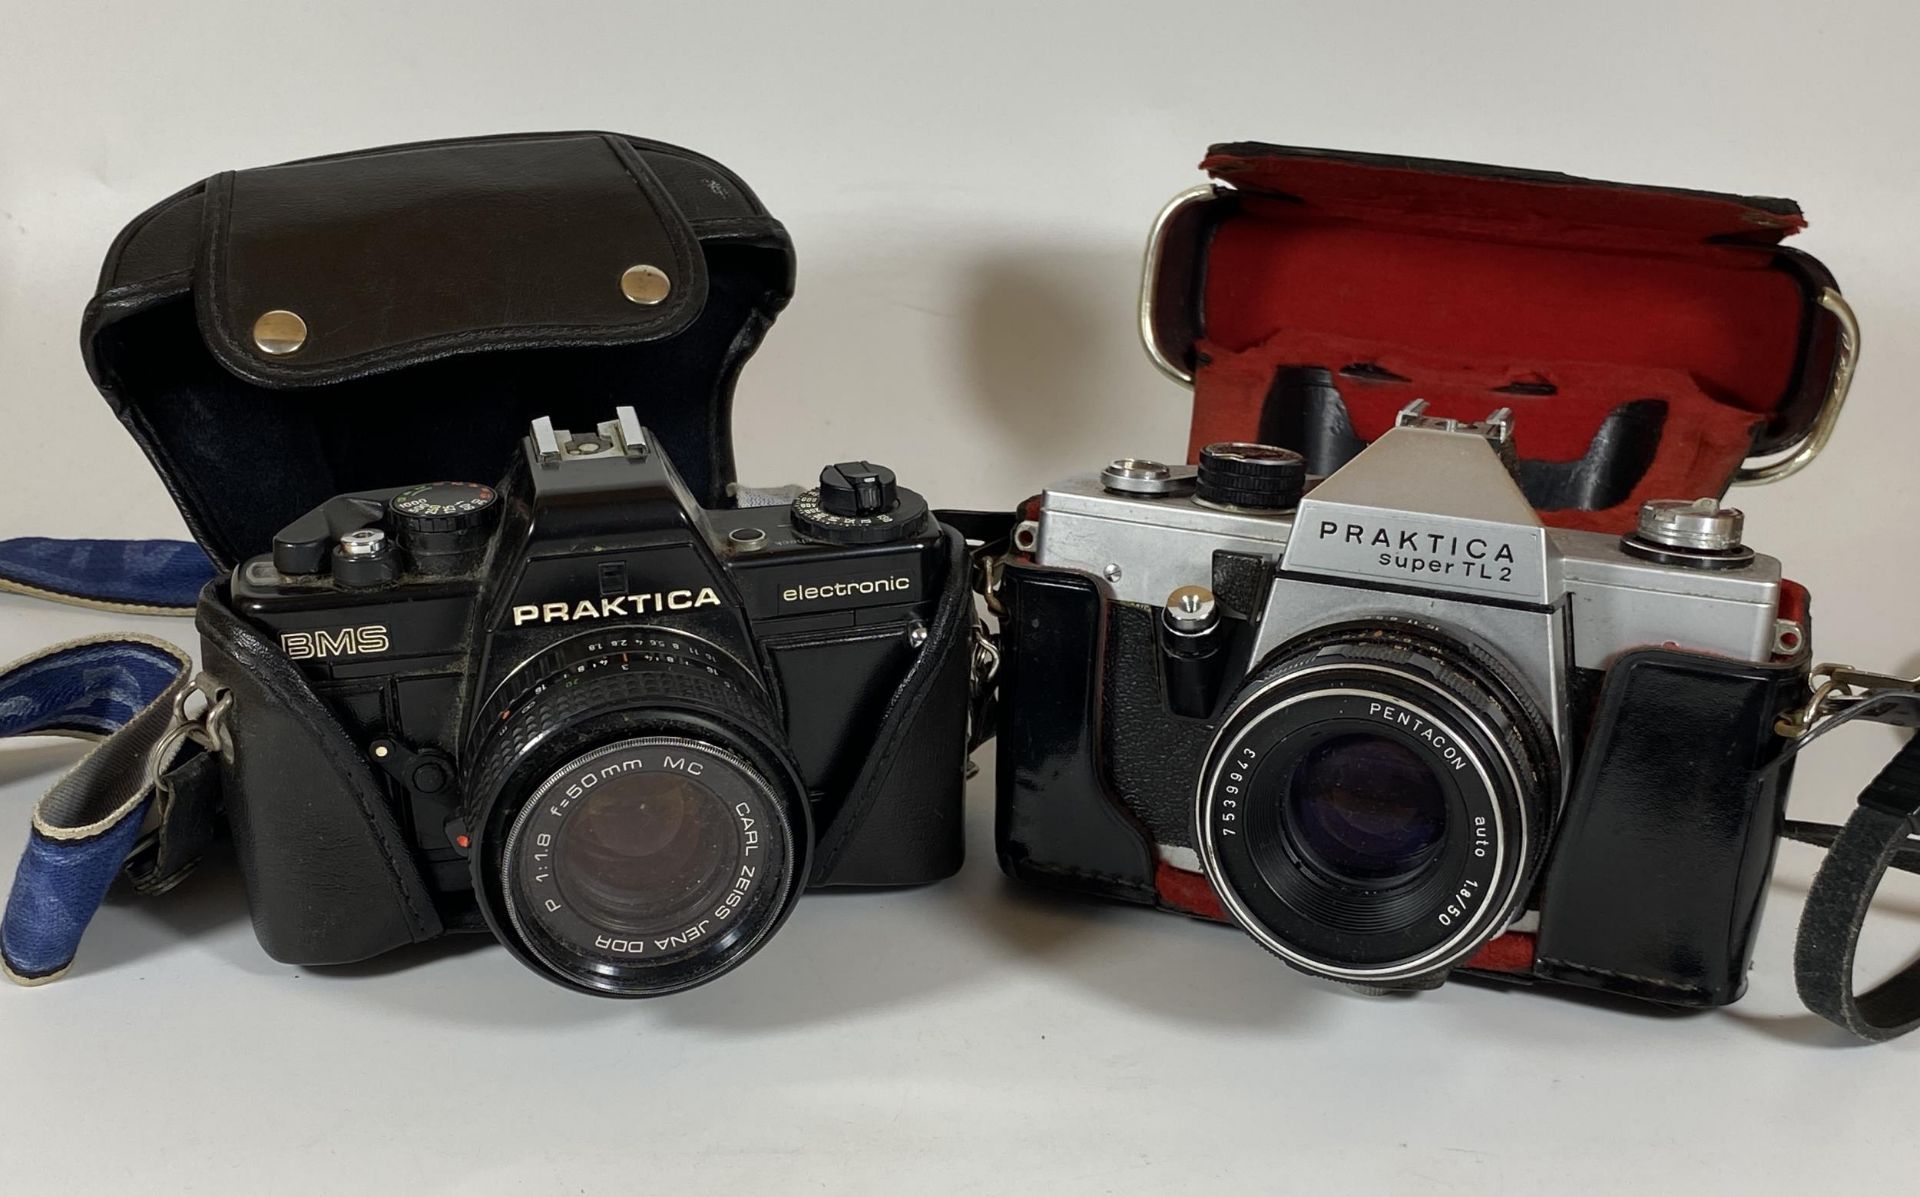 TWO VINTAGE CASED PRAKTICA CAMERAS - PRAKTICA BMS ELECTRONIC FITTED WITH CARL ZEISS JENA DDR 50MM,